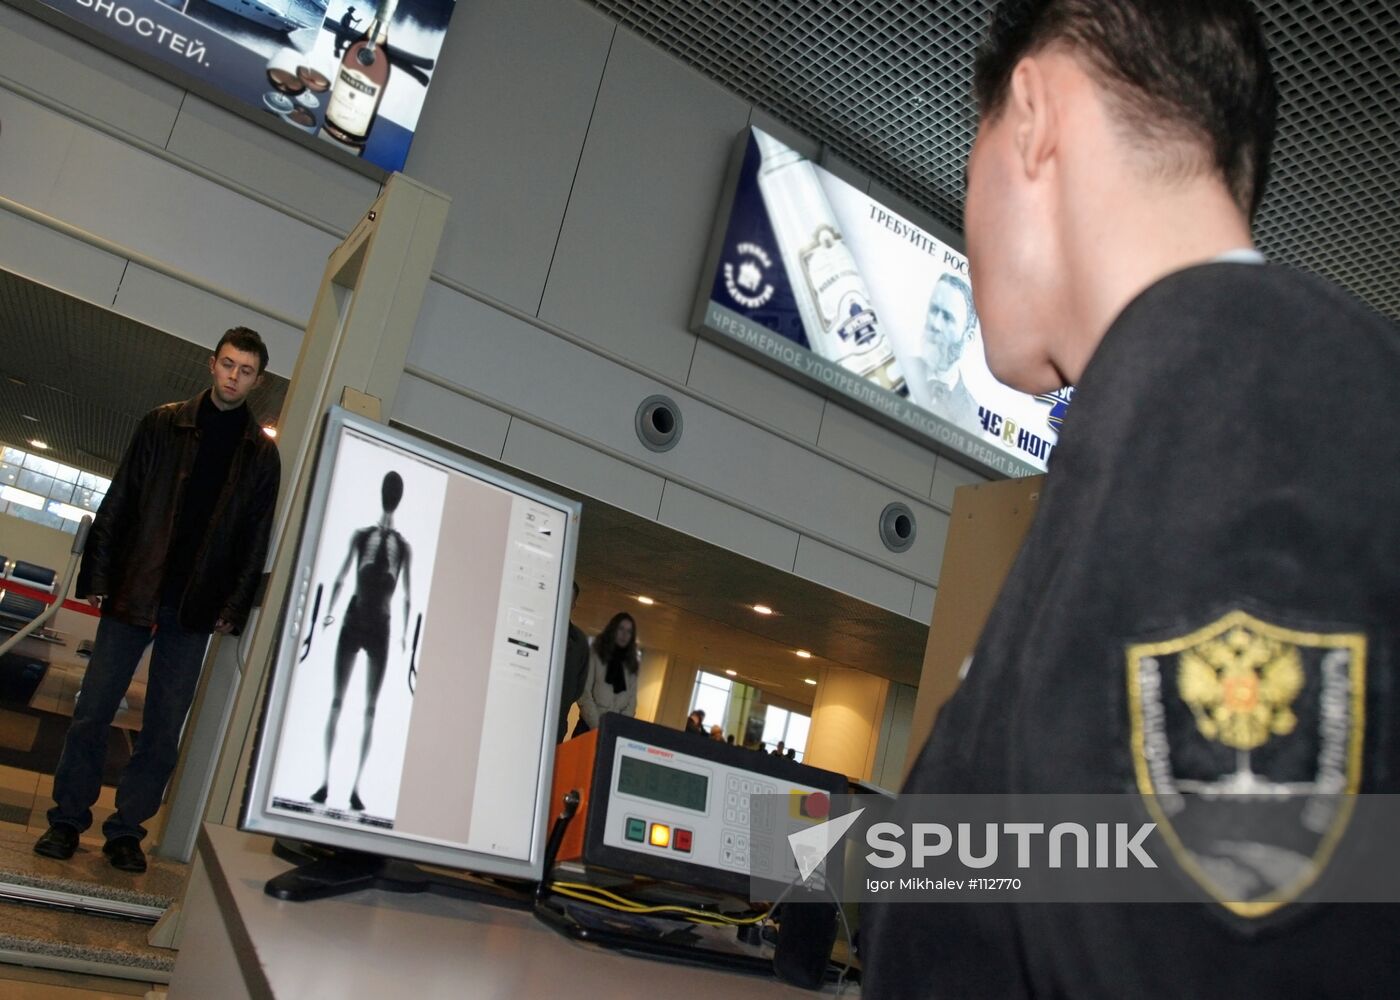 Domodedovo Airport security